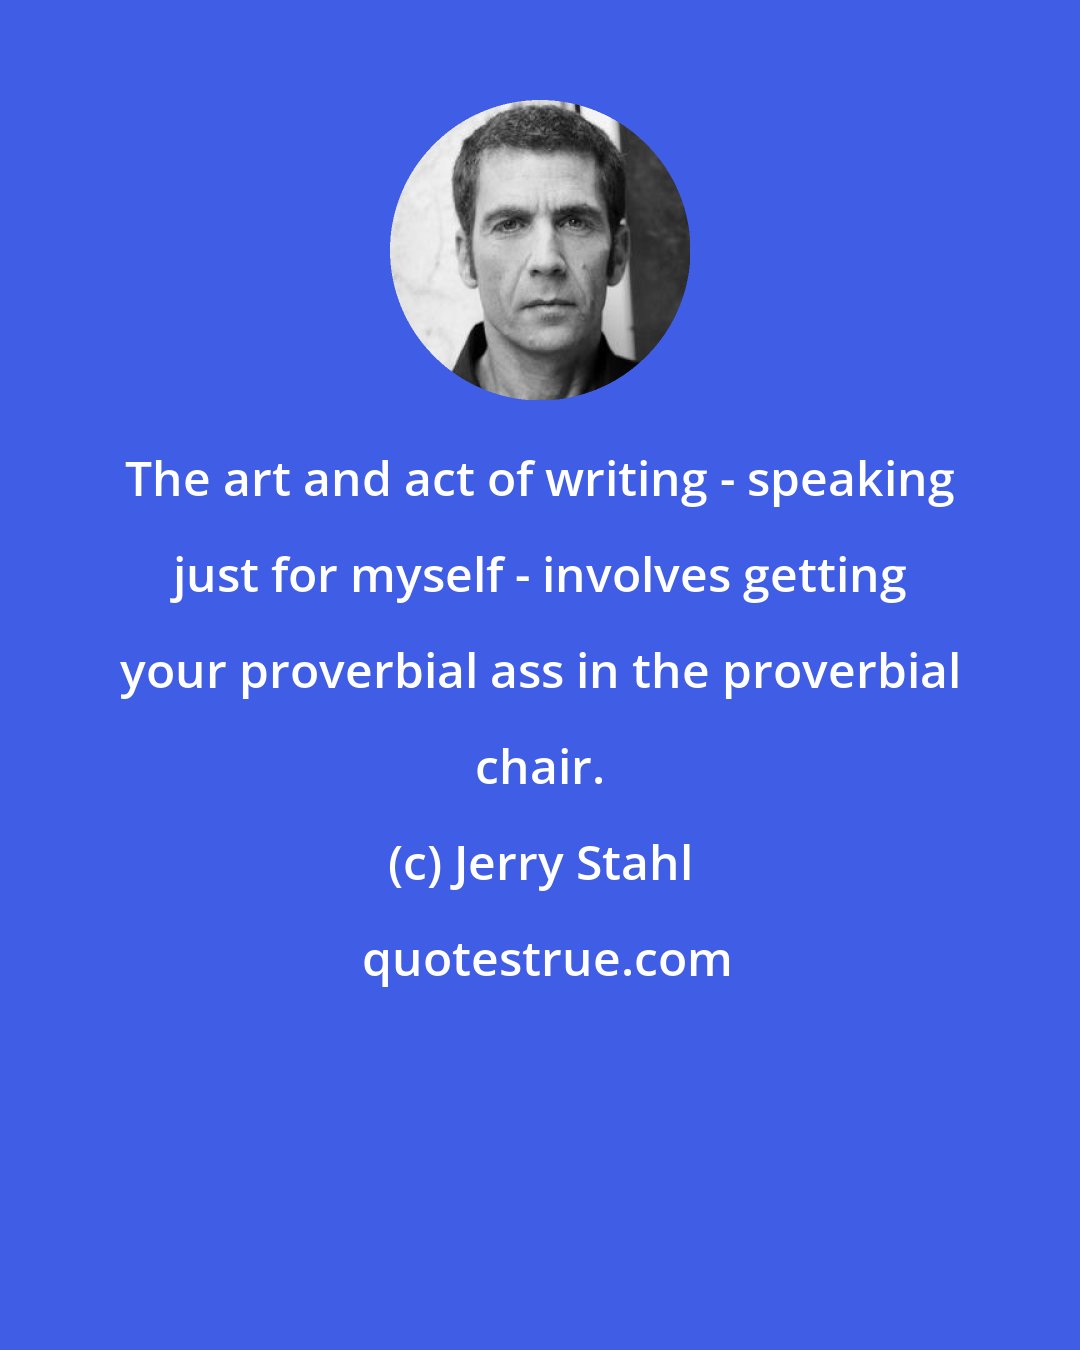 Jerry Stahl: The art and act of writing - speaking just for myself - involves getting your proverbial ass in the proverbial chair.